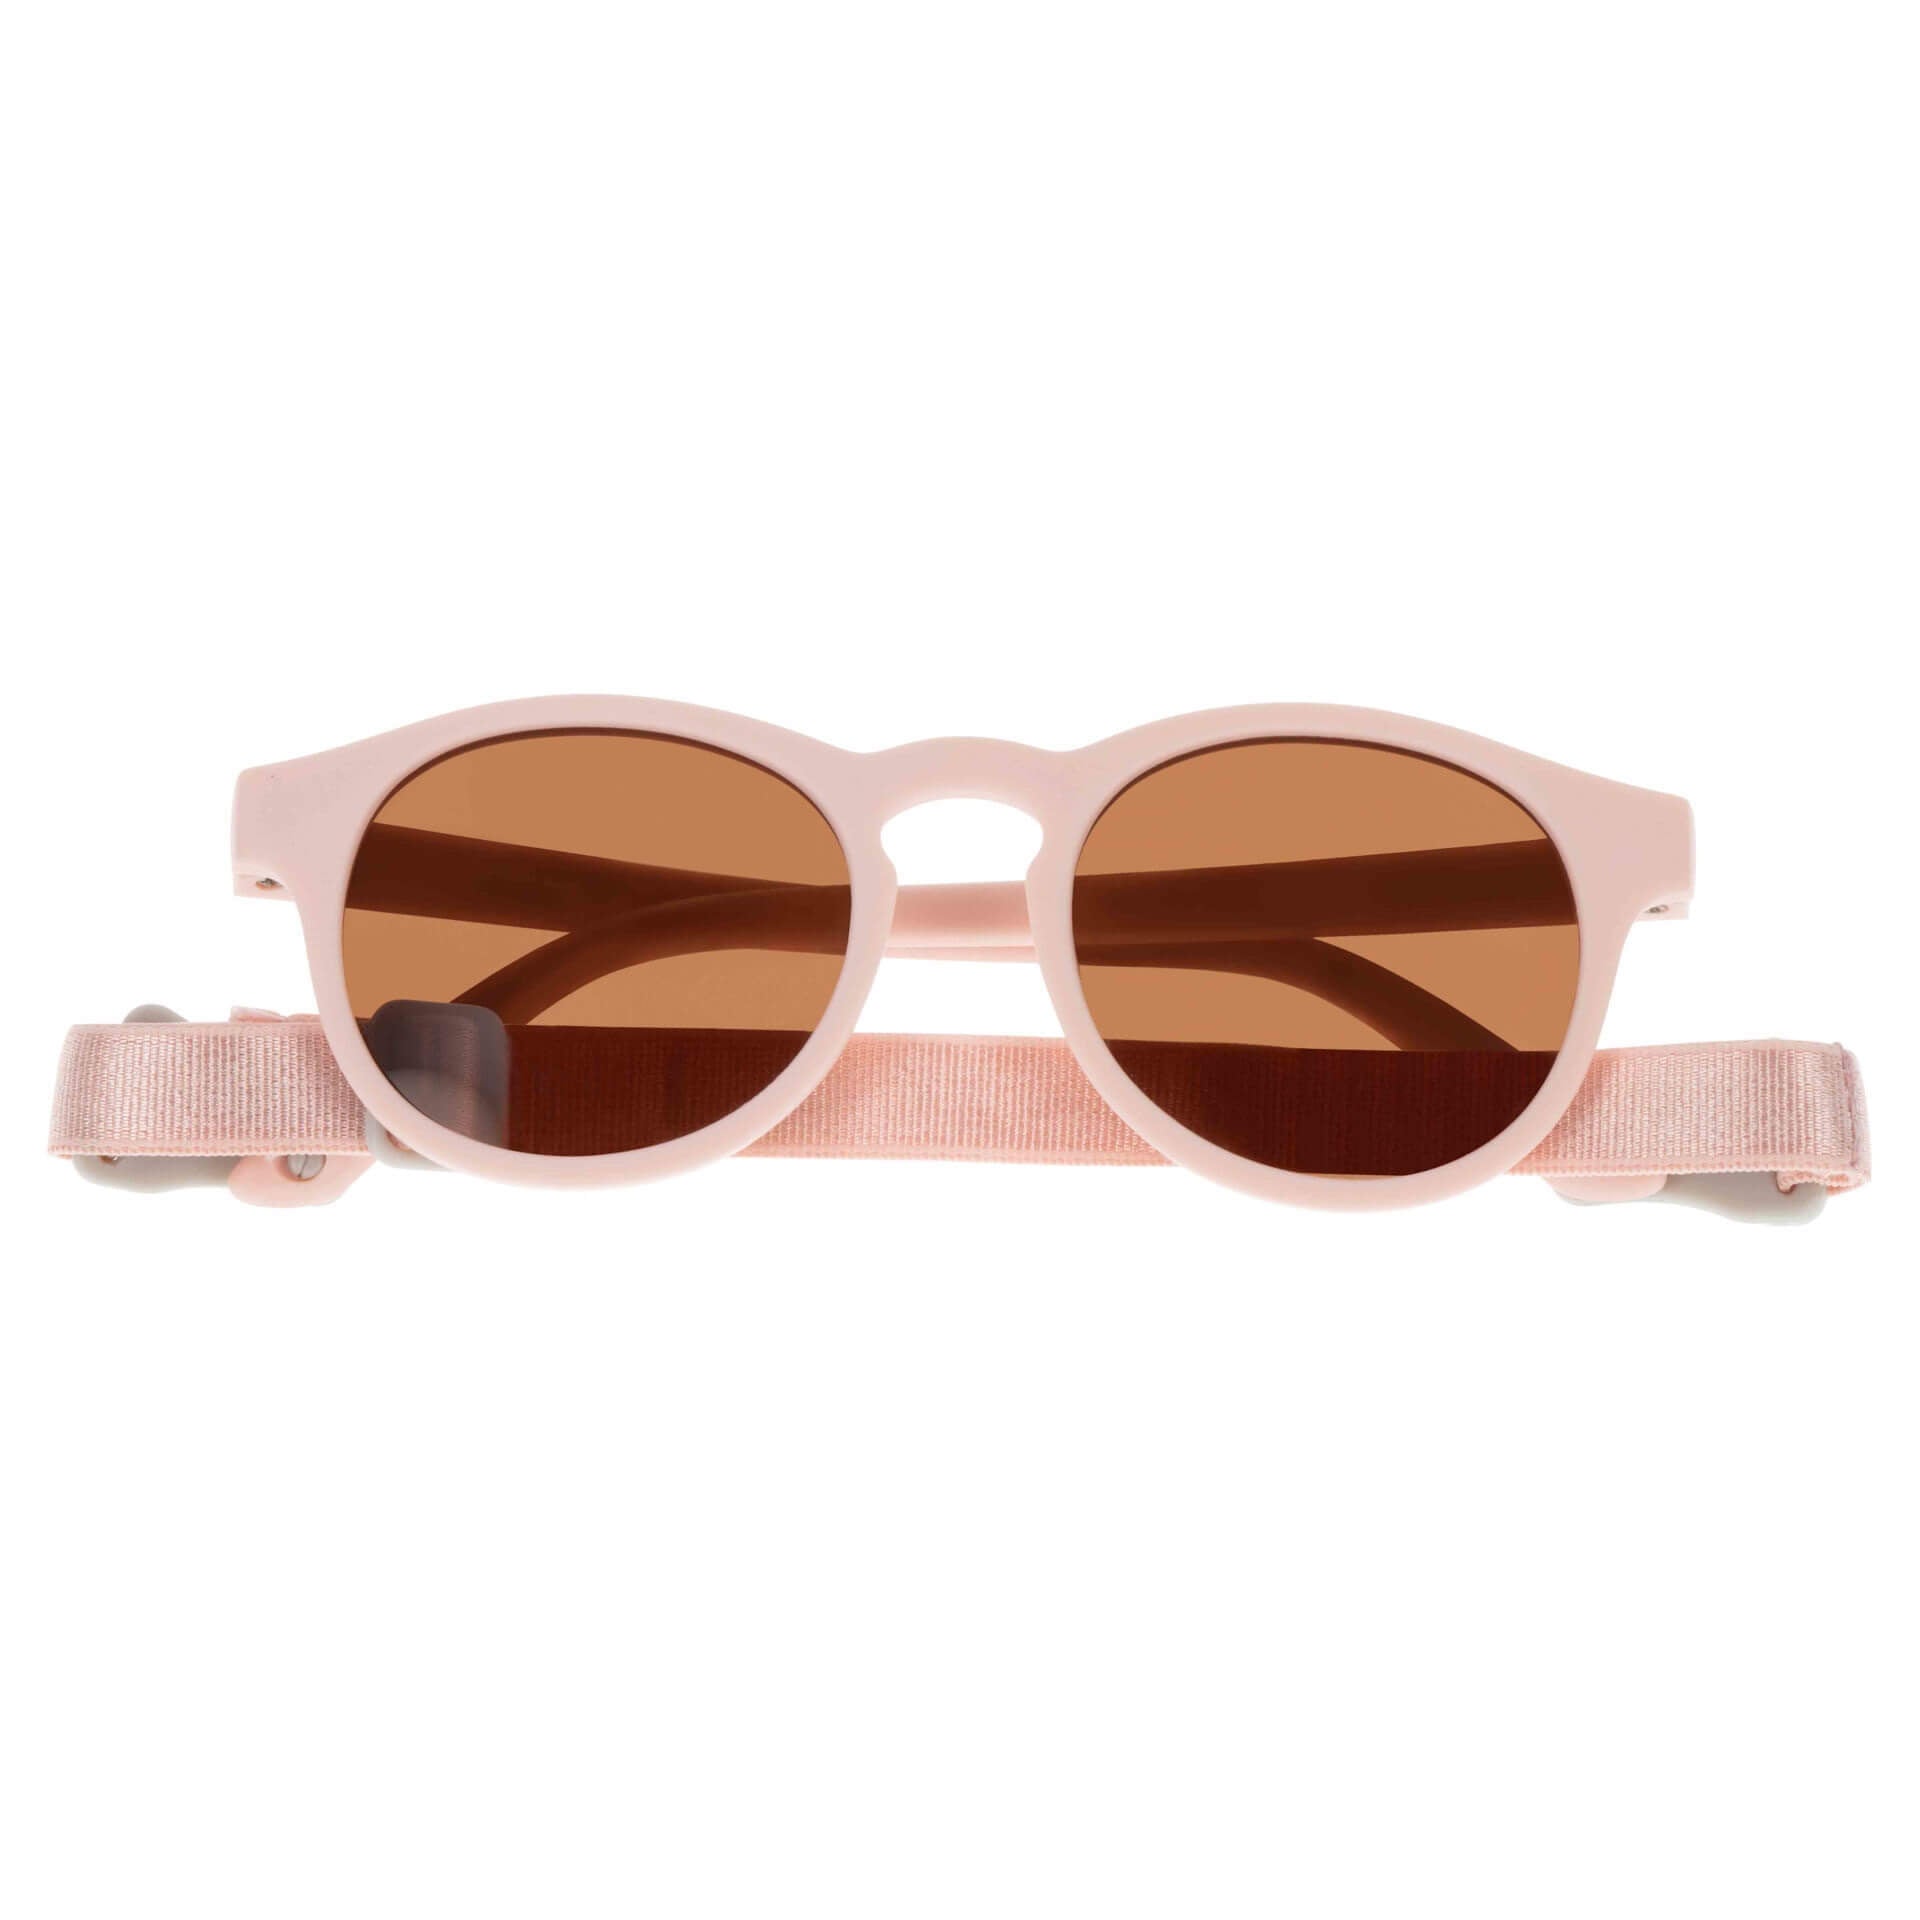 Dooky kids sunglasses offer UV -400 protection for children from 6 to 36 months. Detachable strap to easily adjust the sunglasses ensuring a comfortable fit. Scratch resistant and anti reflective.